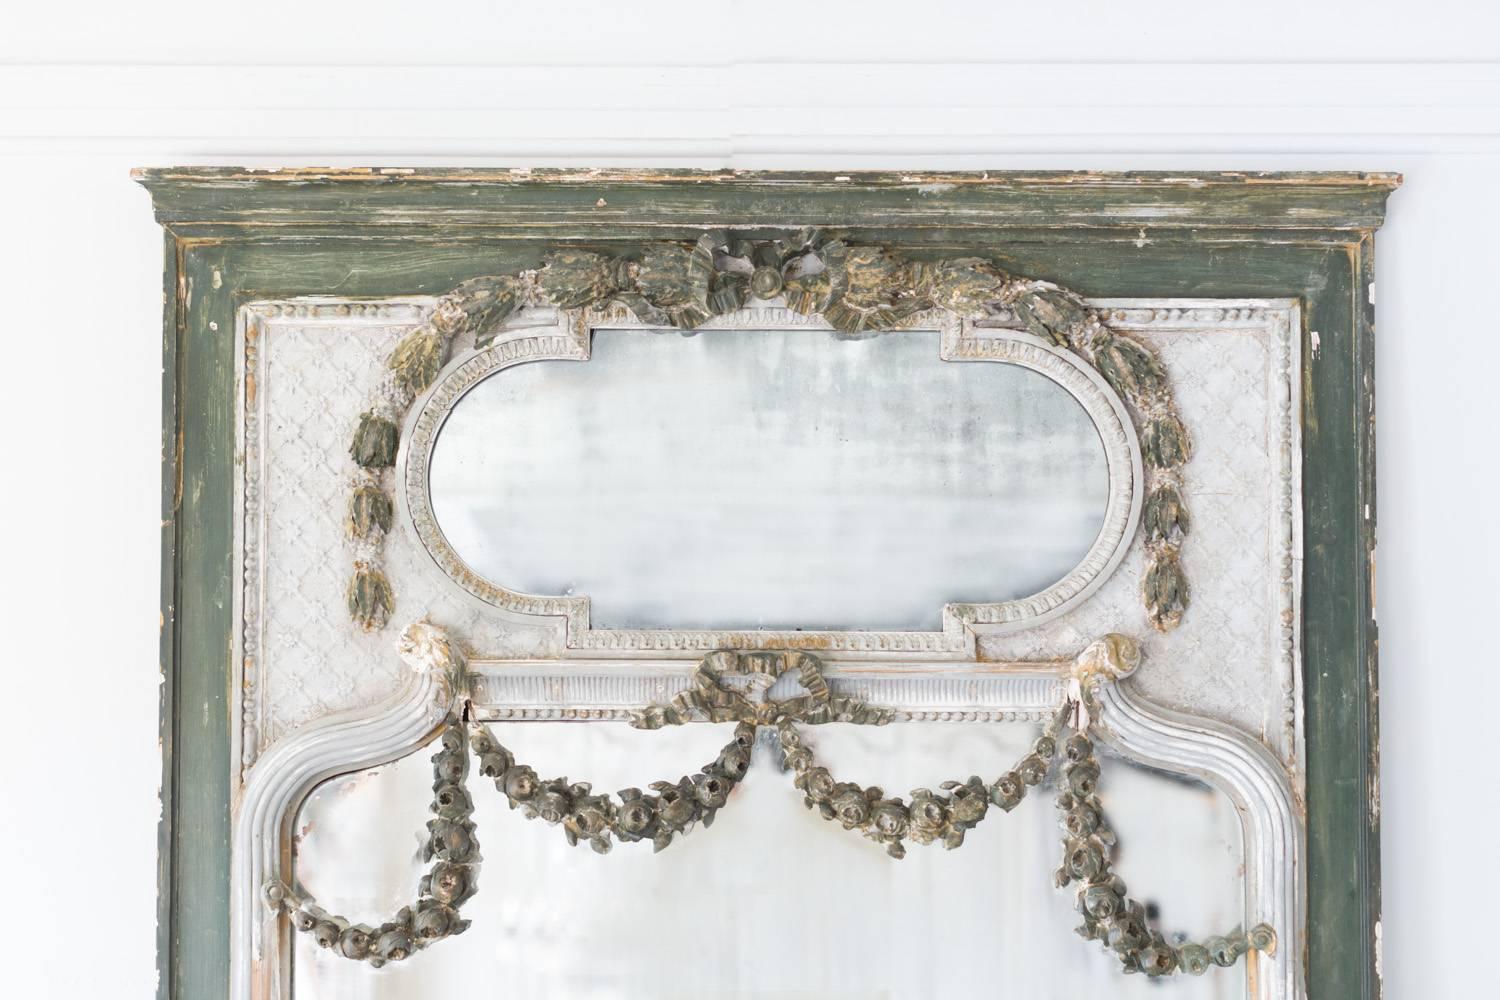 Antique Louis XVI mirror in distressed silver and kelly green finish. A sweet rose garland spills over the main glass, another string of flowers frames the top of the oval glass. The main mirror boasts a small crack in the middle and gradient